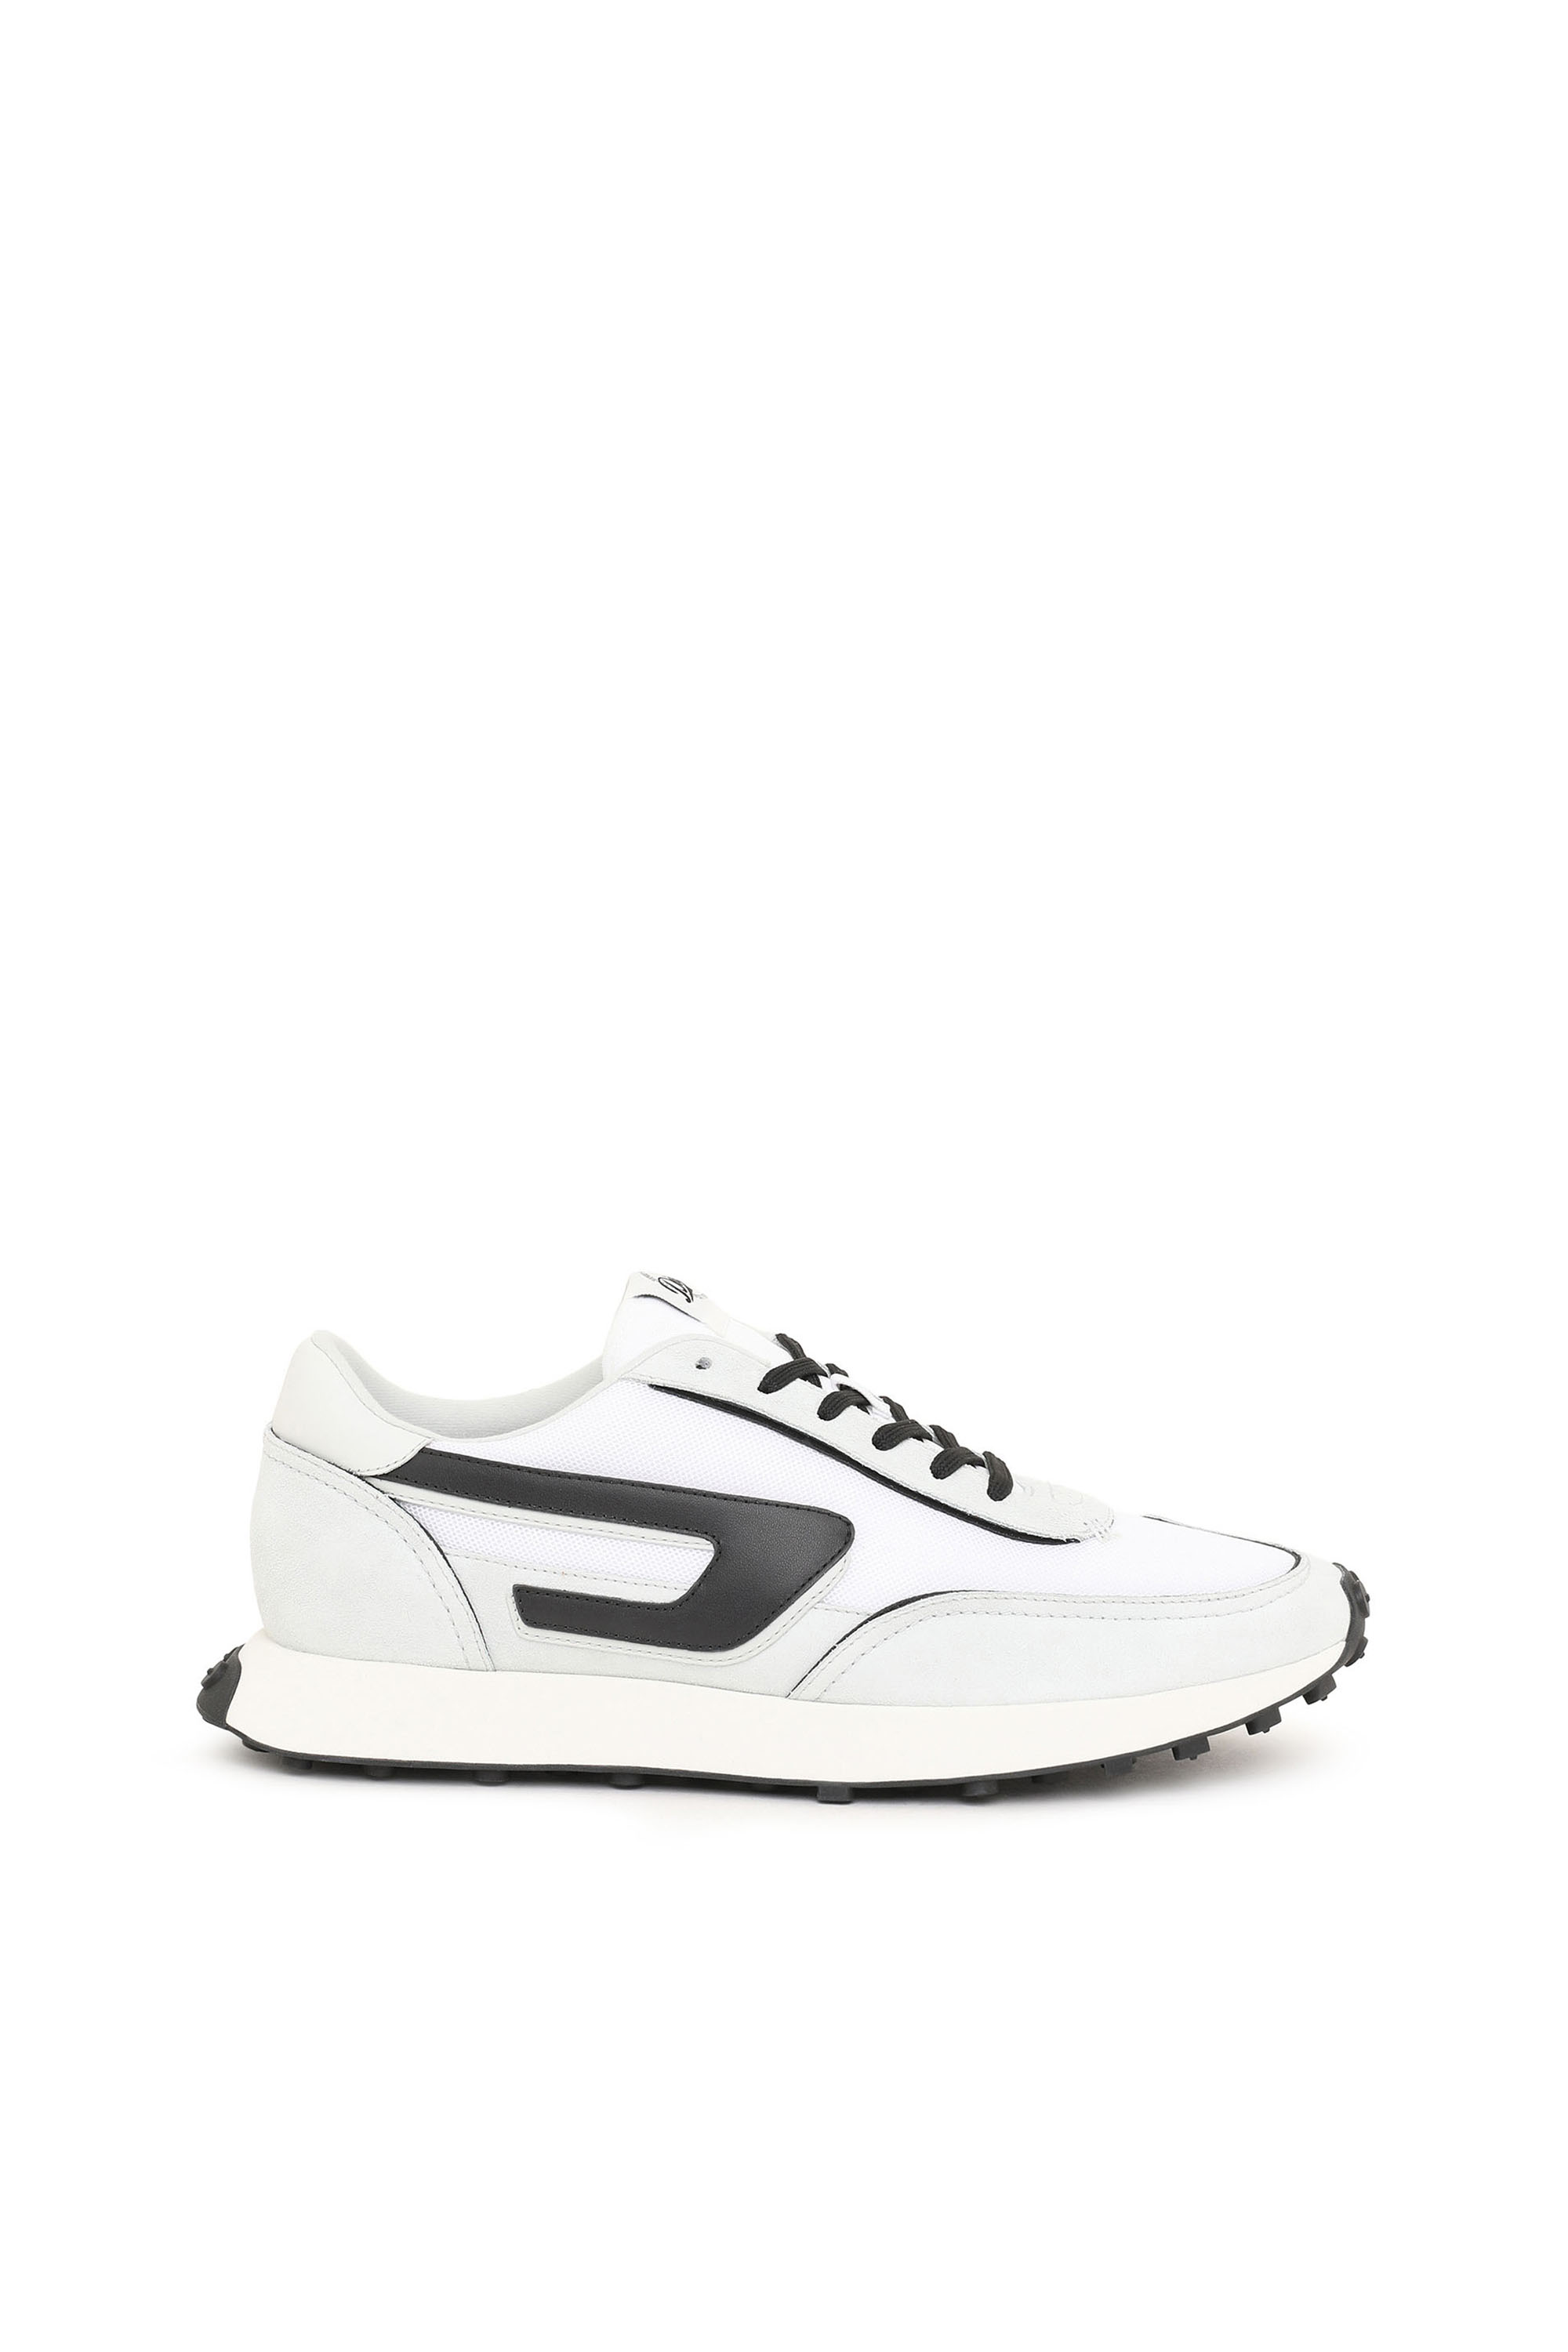 S-RACER LC W Woman: Sneakers in mesh, suede and leather | Diesel